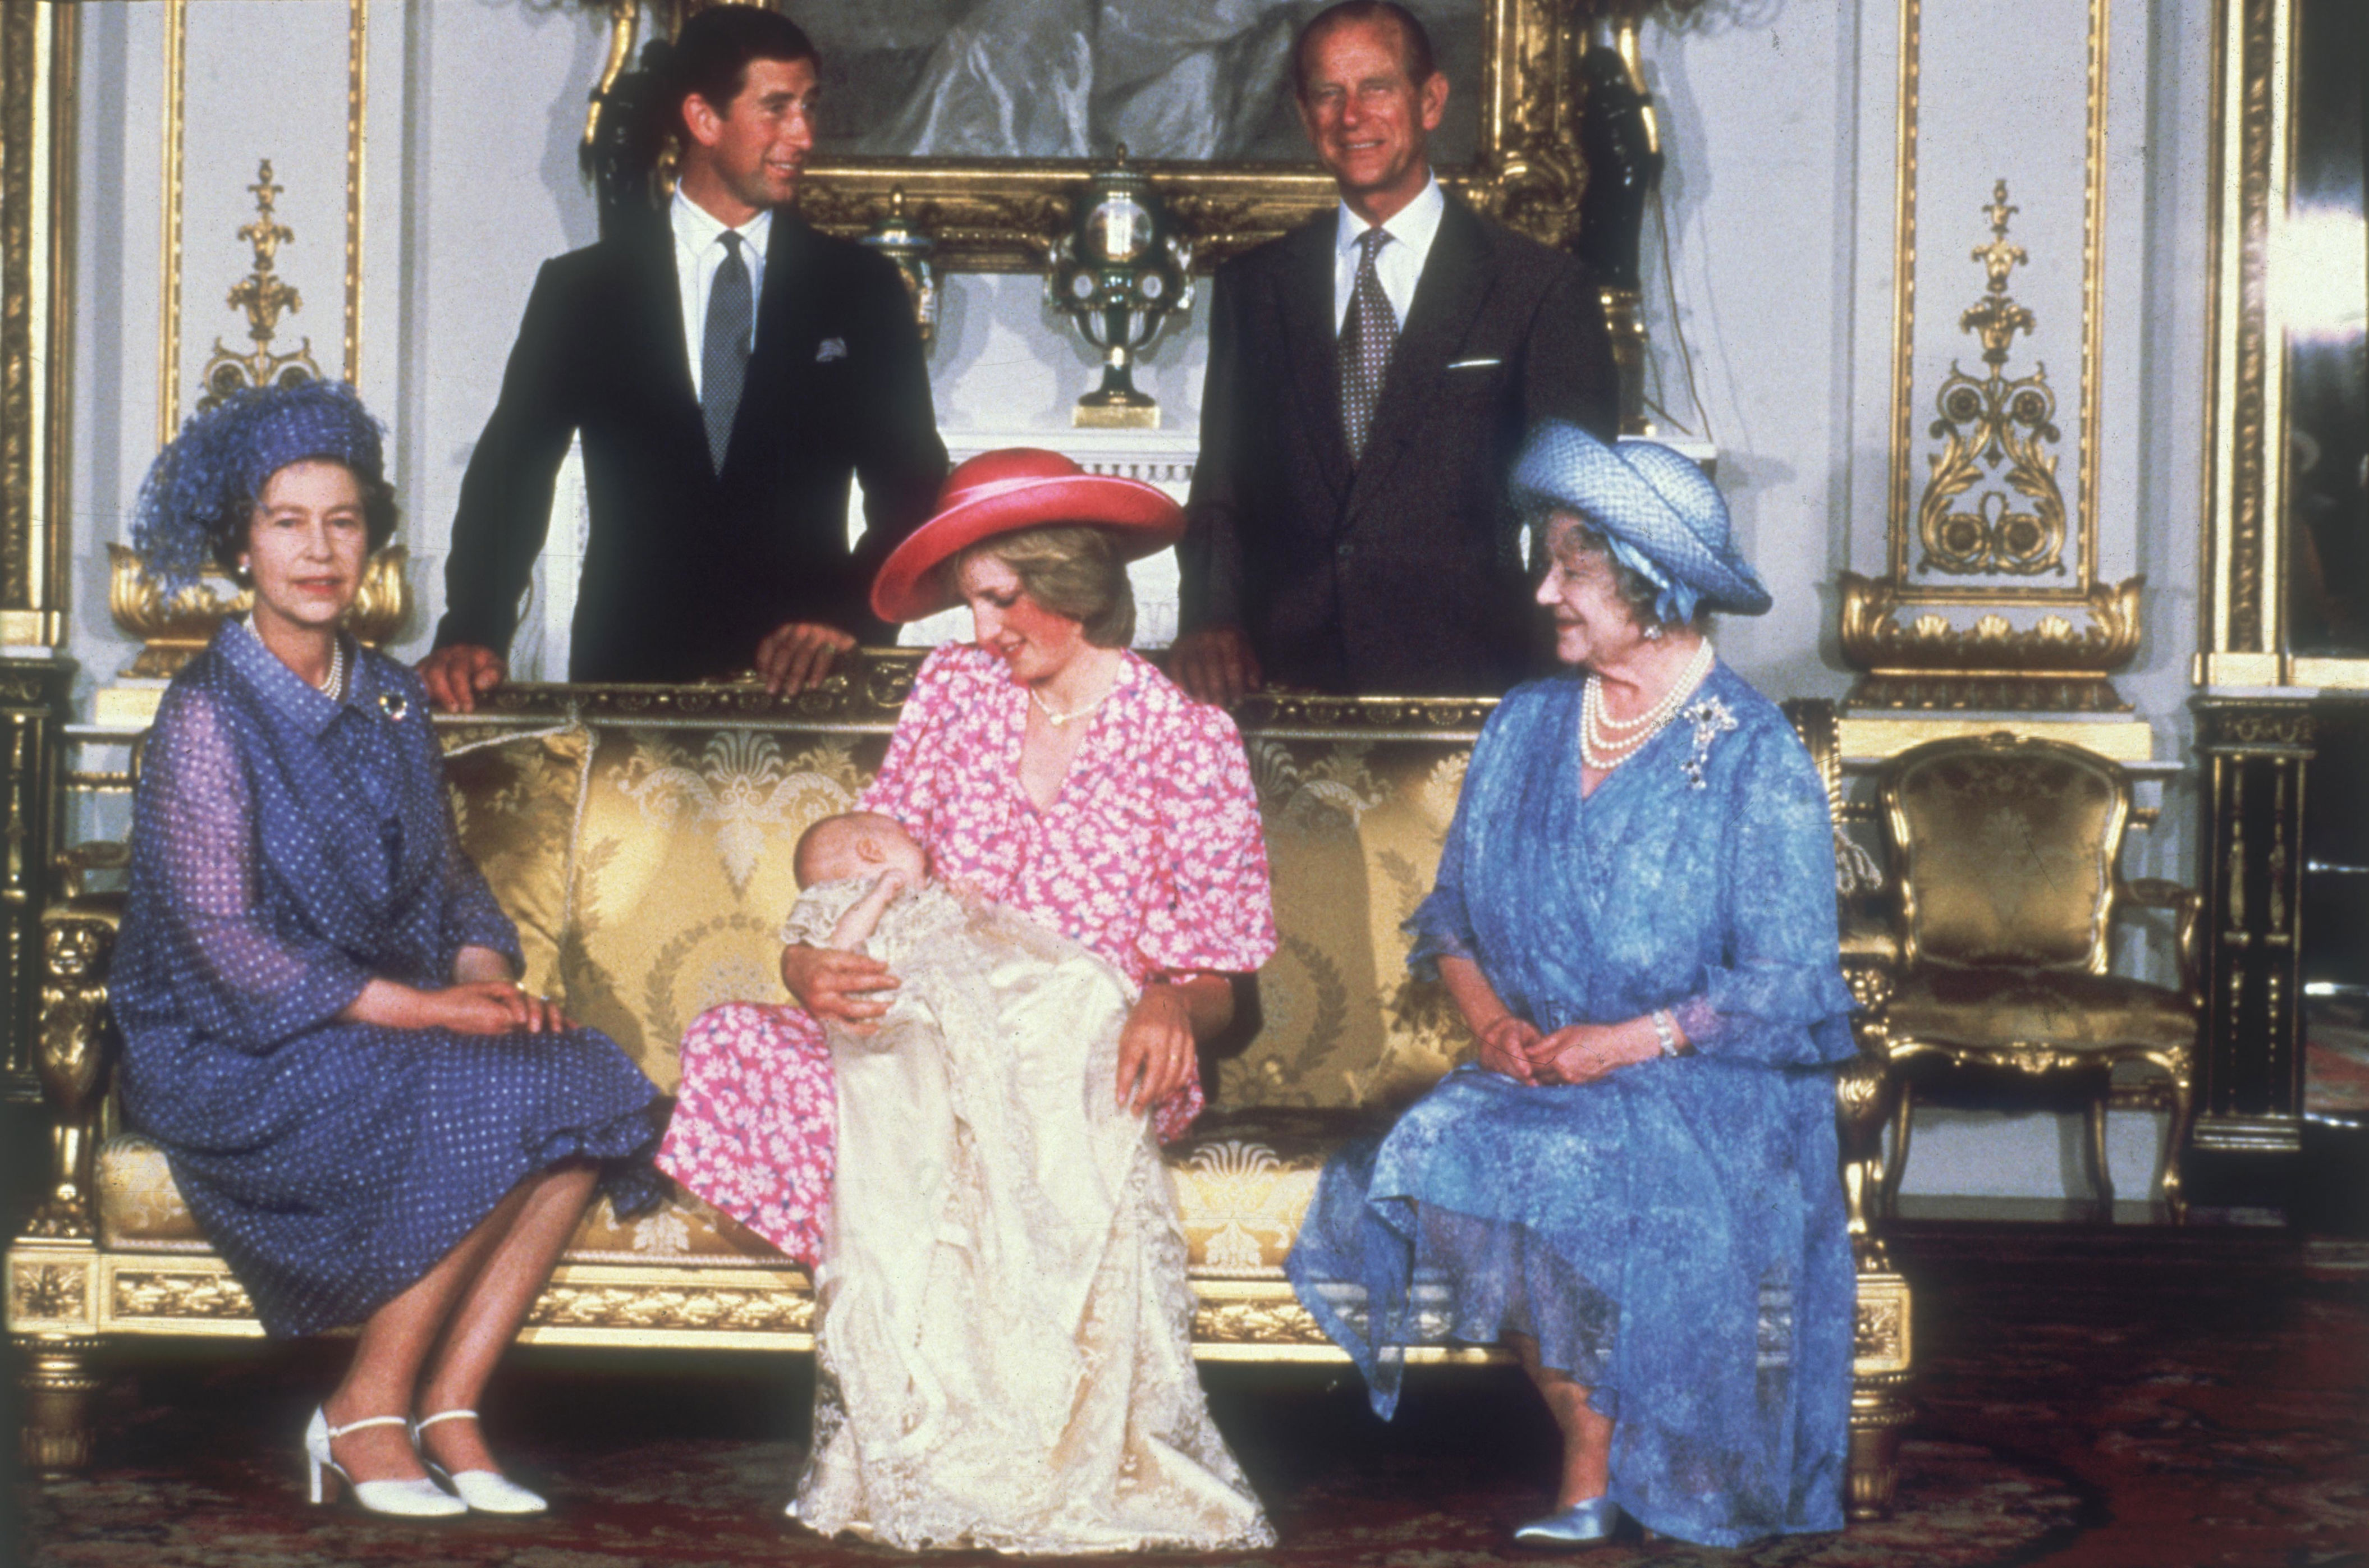 <p>Queen Elizabeth II posed for a family photo alongside daughter-in-law Princess Diana -- seen holding son <a href="https://www.wonderwall.com/celebrity/profiles/overview/prince-william-482.article">Prince William</a> after his christening -- mother Queen Elizabeth the Queen Mother, son Prince Charles and husband Prince Philip at Buckingham Palace in London on Aug. 4, 1982.</p>